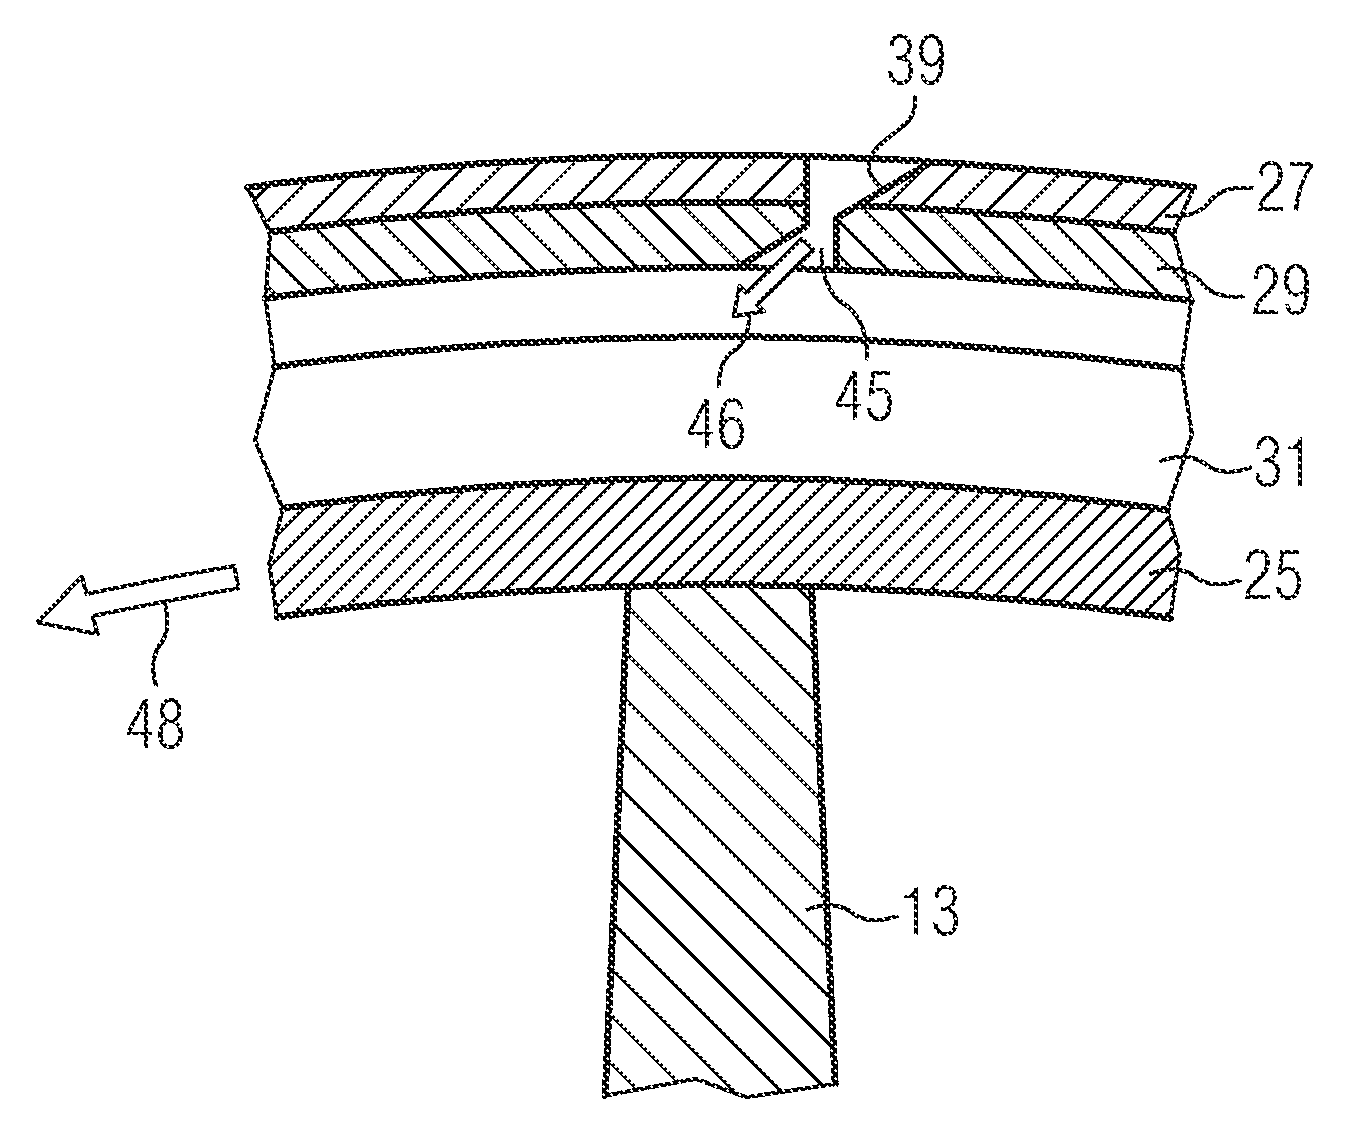 Turbine arrangement and method of cooling a shroud located at the tip of a turbine blade